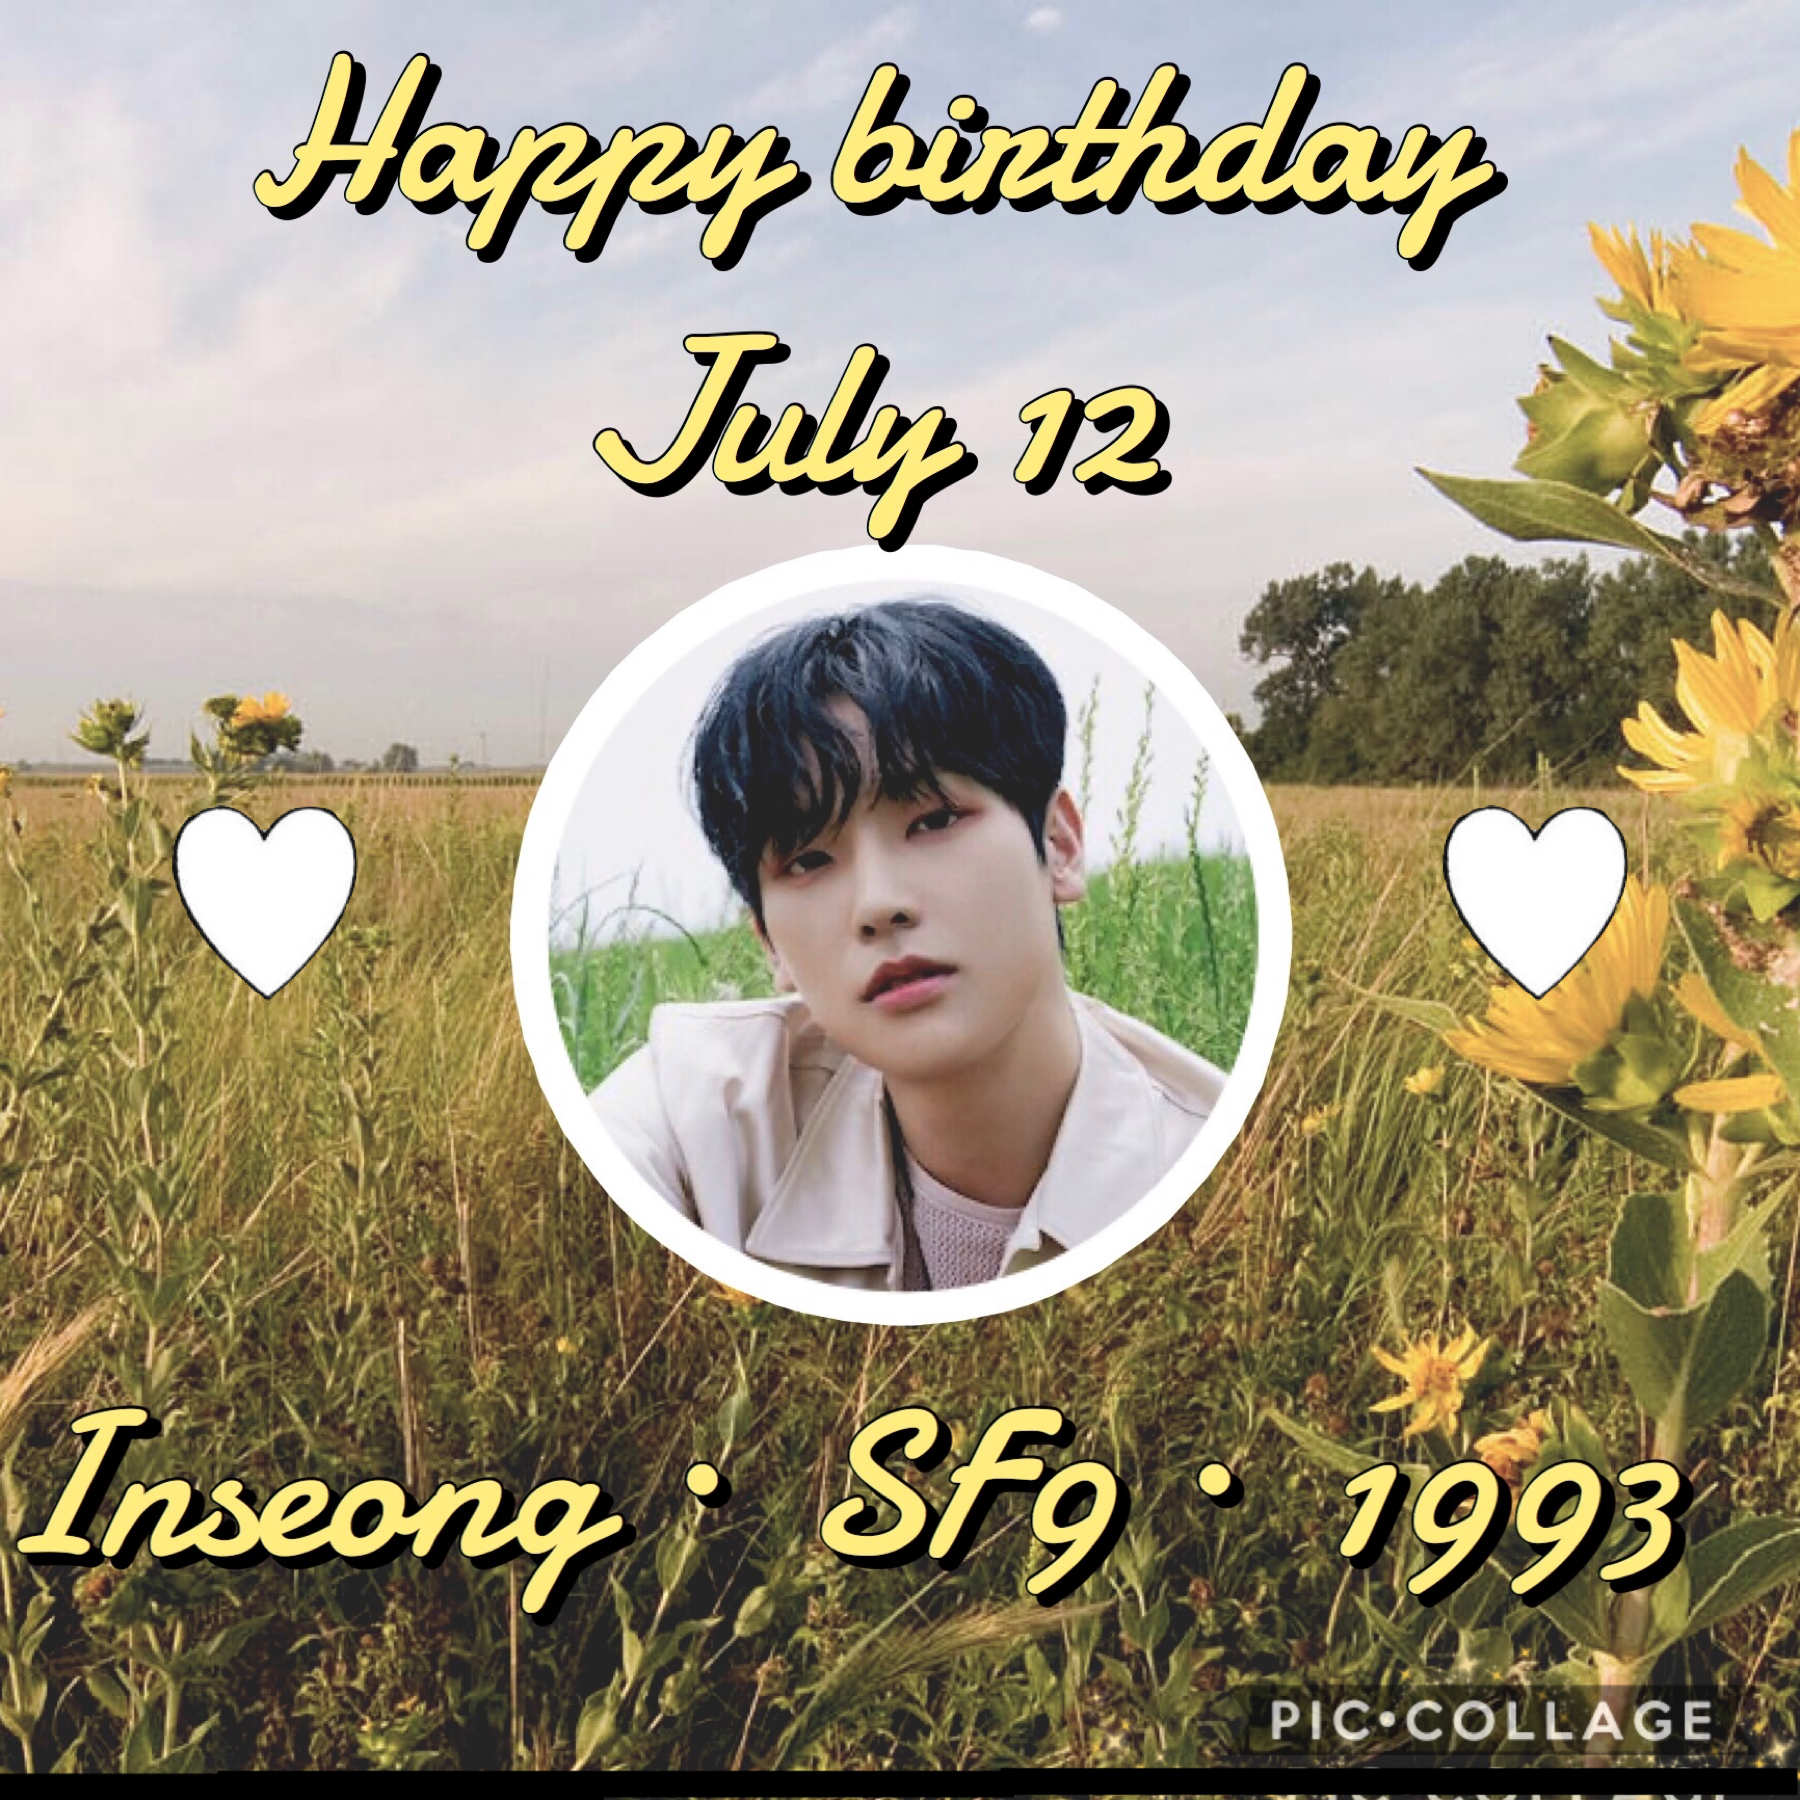 •🌻🍃•
Happy birthday Inseong!! He’s such a great vocalist honestly 🥺 Check out Summer Breeze by SF9!❤️
🌻🍃~Whoop~🍃🌻